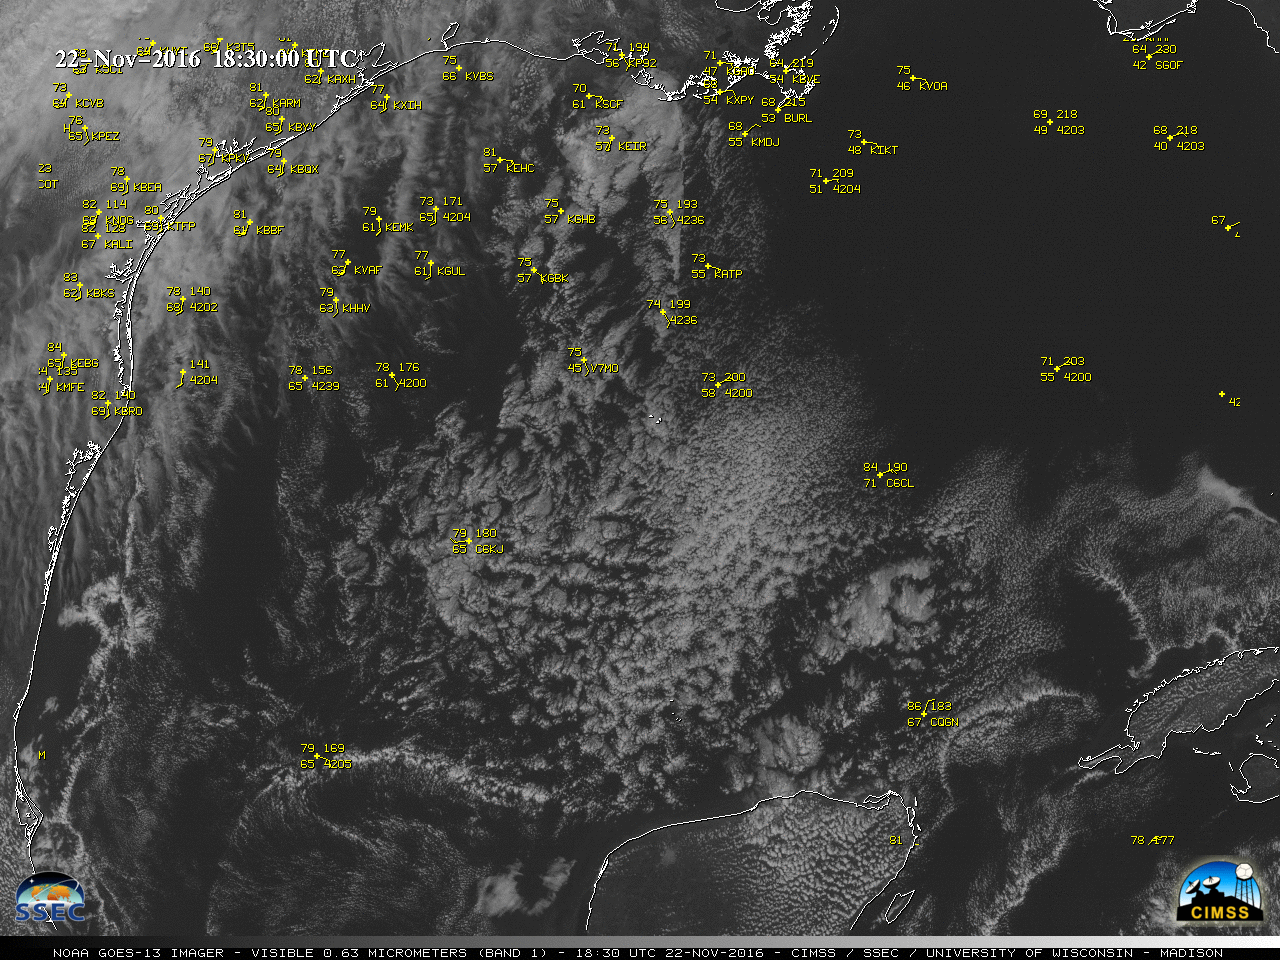 GOES-13 Visible (0.63 µm) images, with hourly surface/buoy/ship reports [click to play animation]